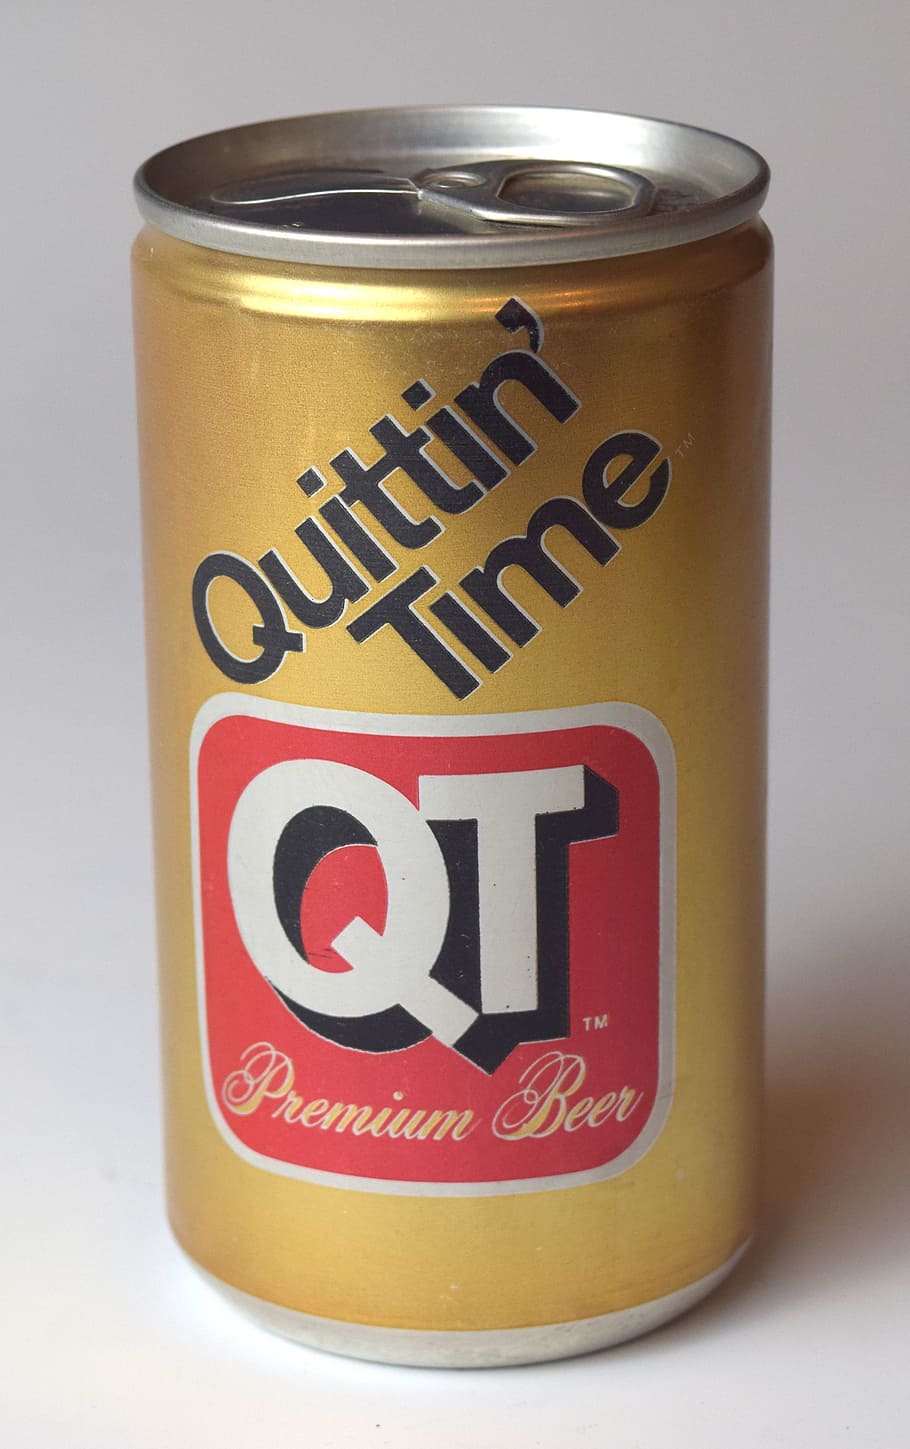 beer, quit, quitting, can, vintage, tin, aluminum, work, labor, text